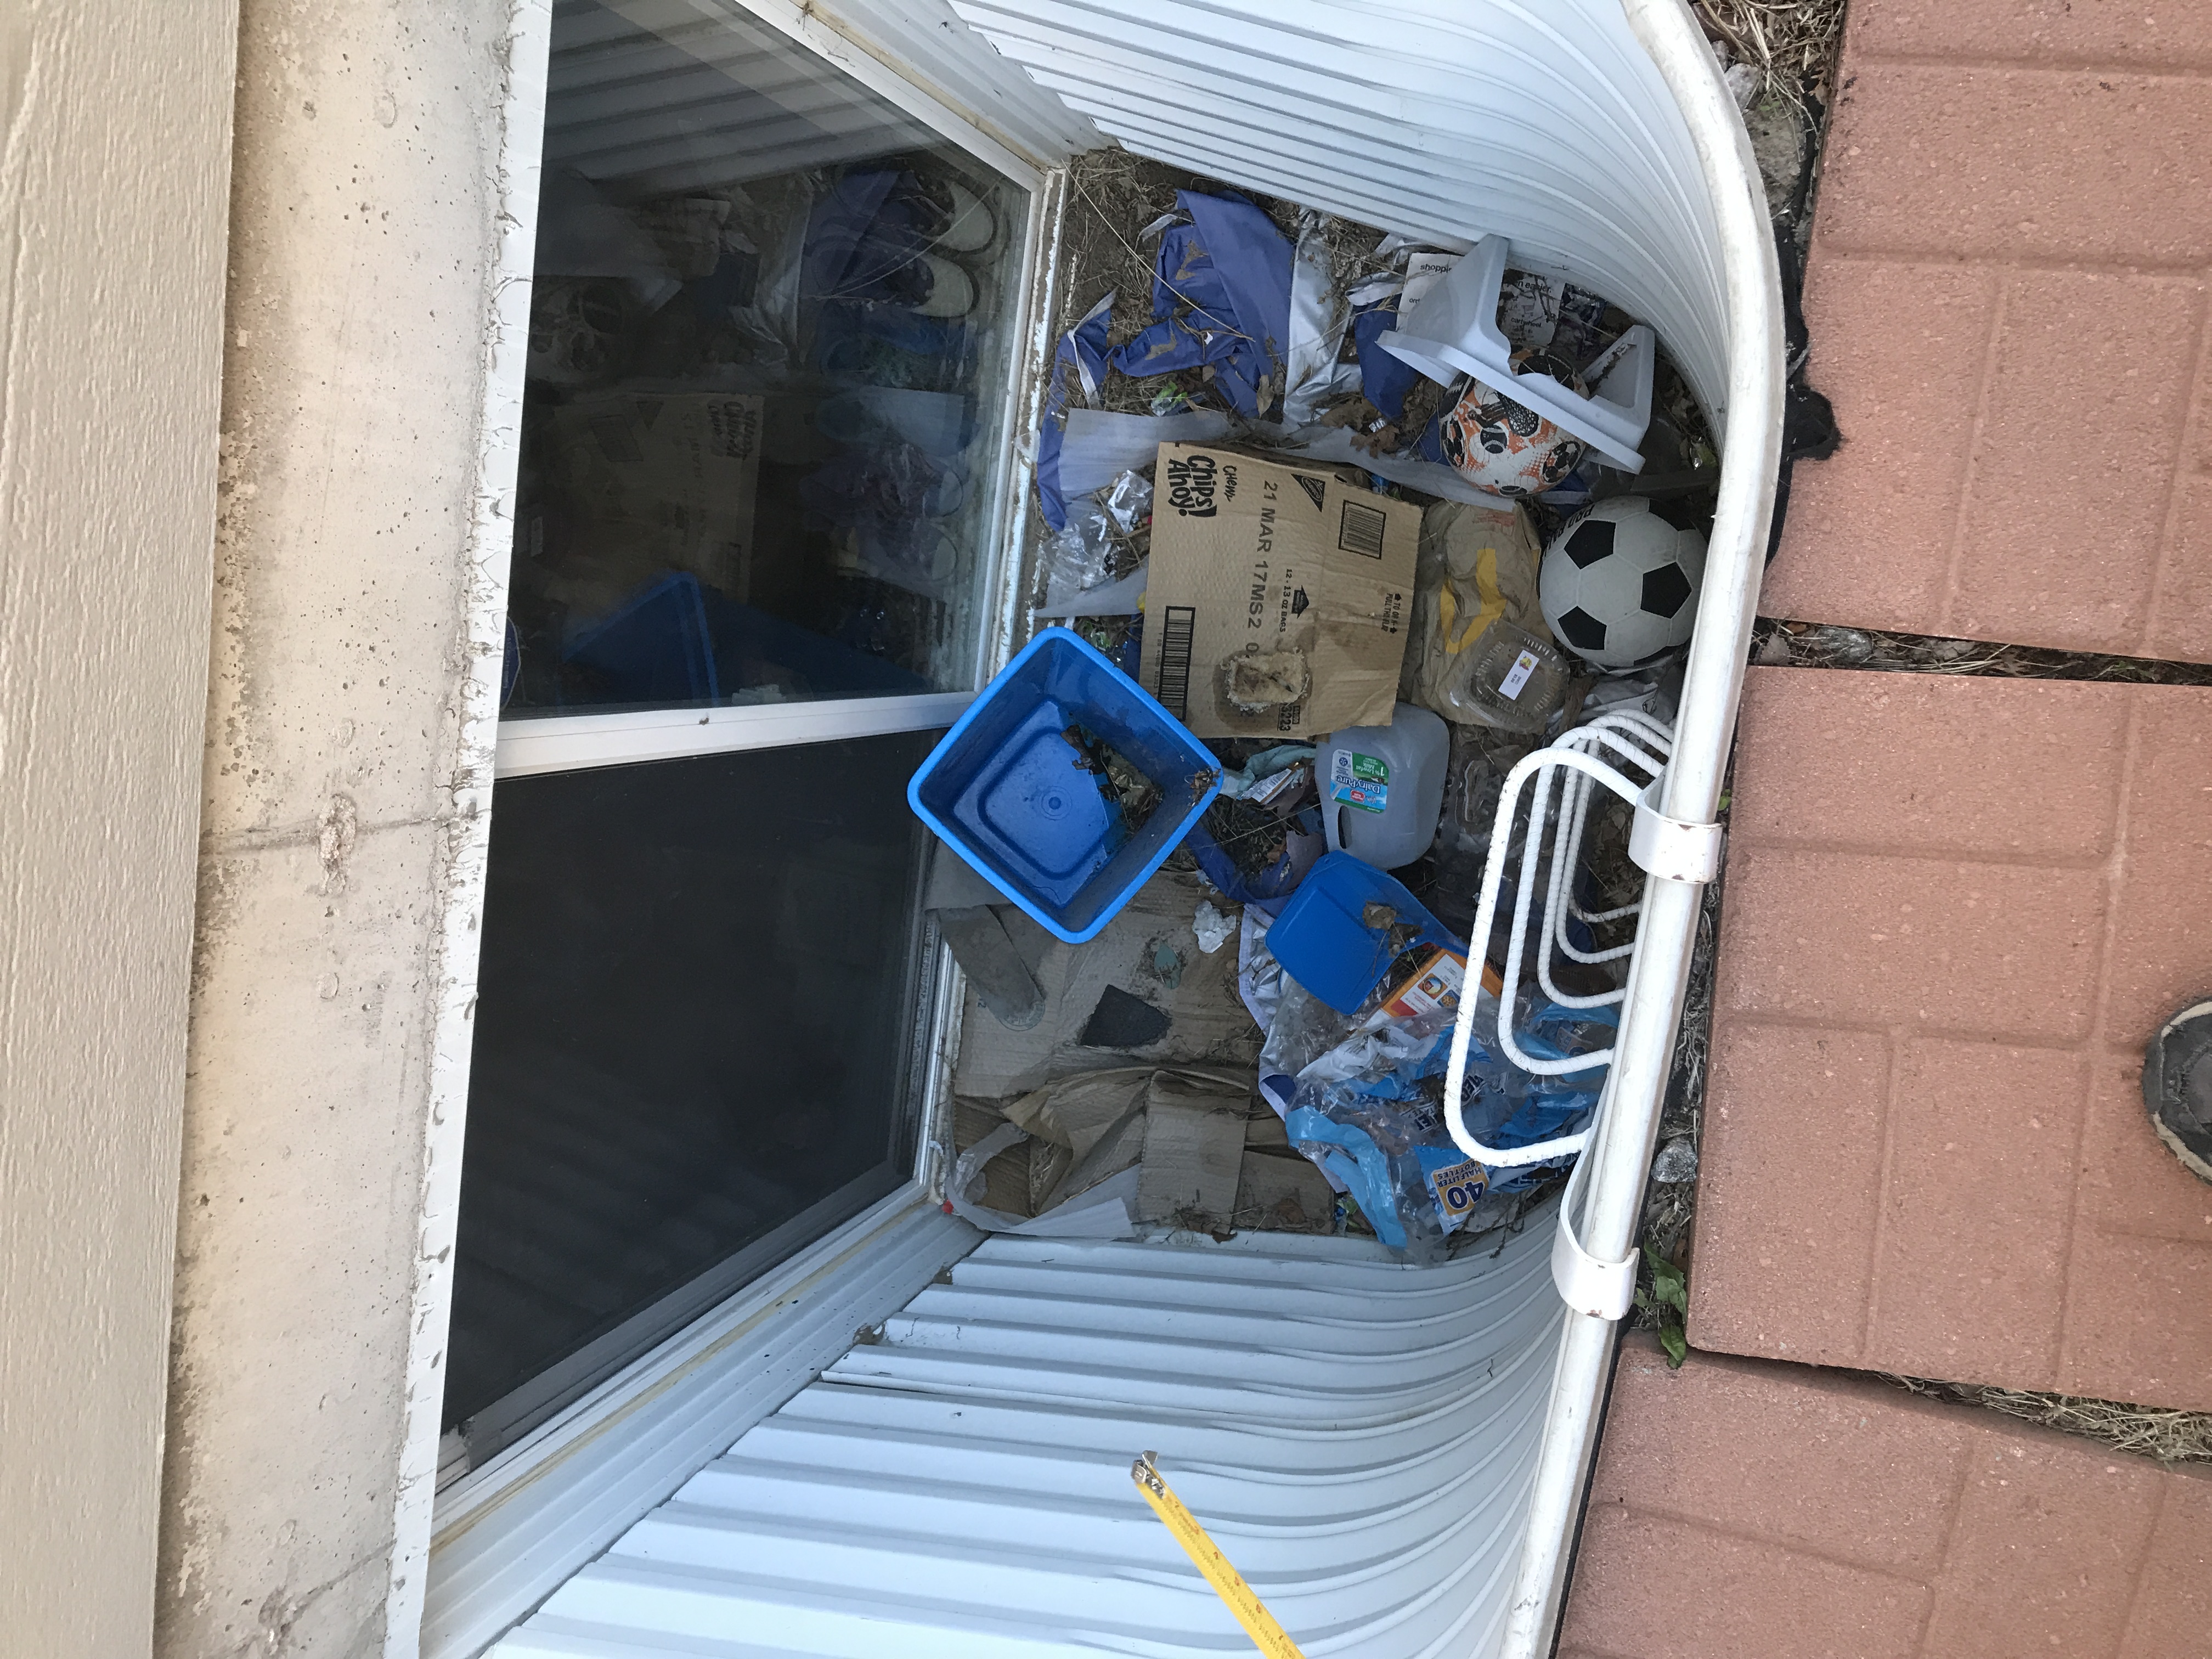 Trash and soccer ball in a window well